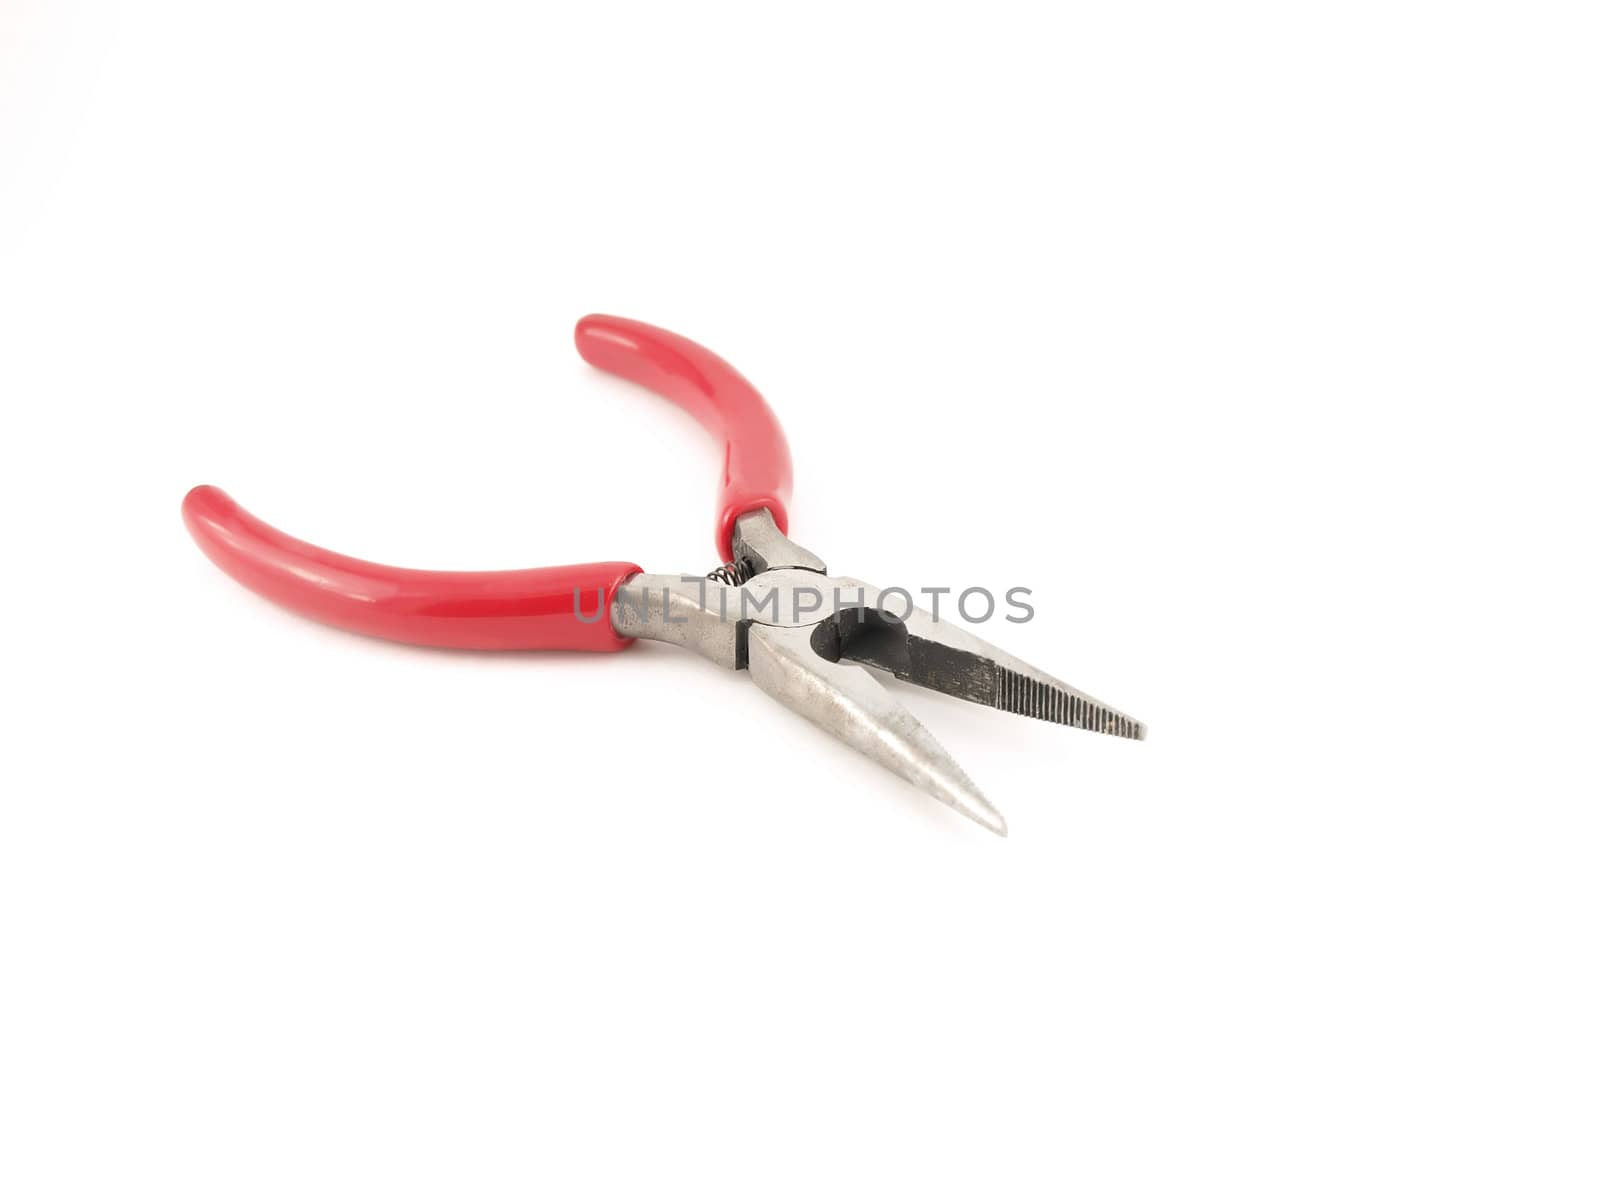 Combination pliers by sergpet